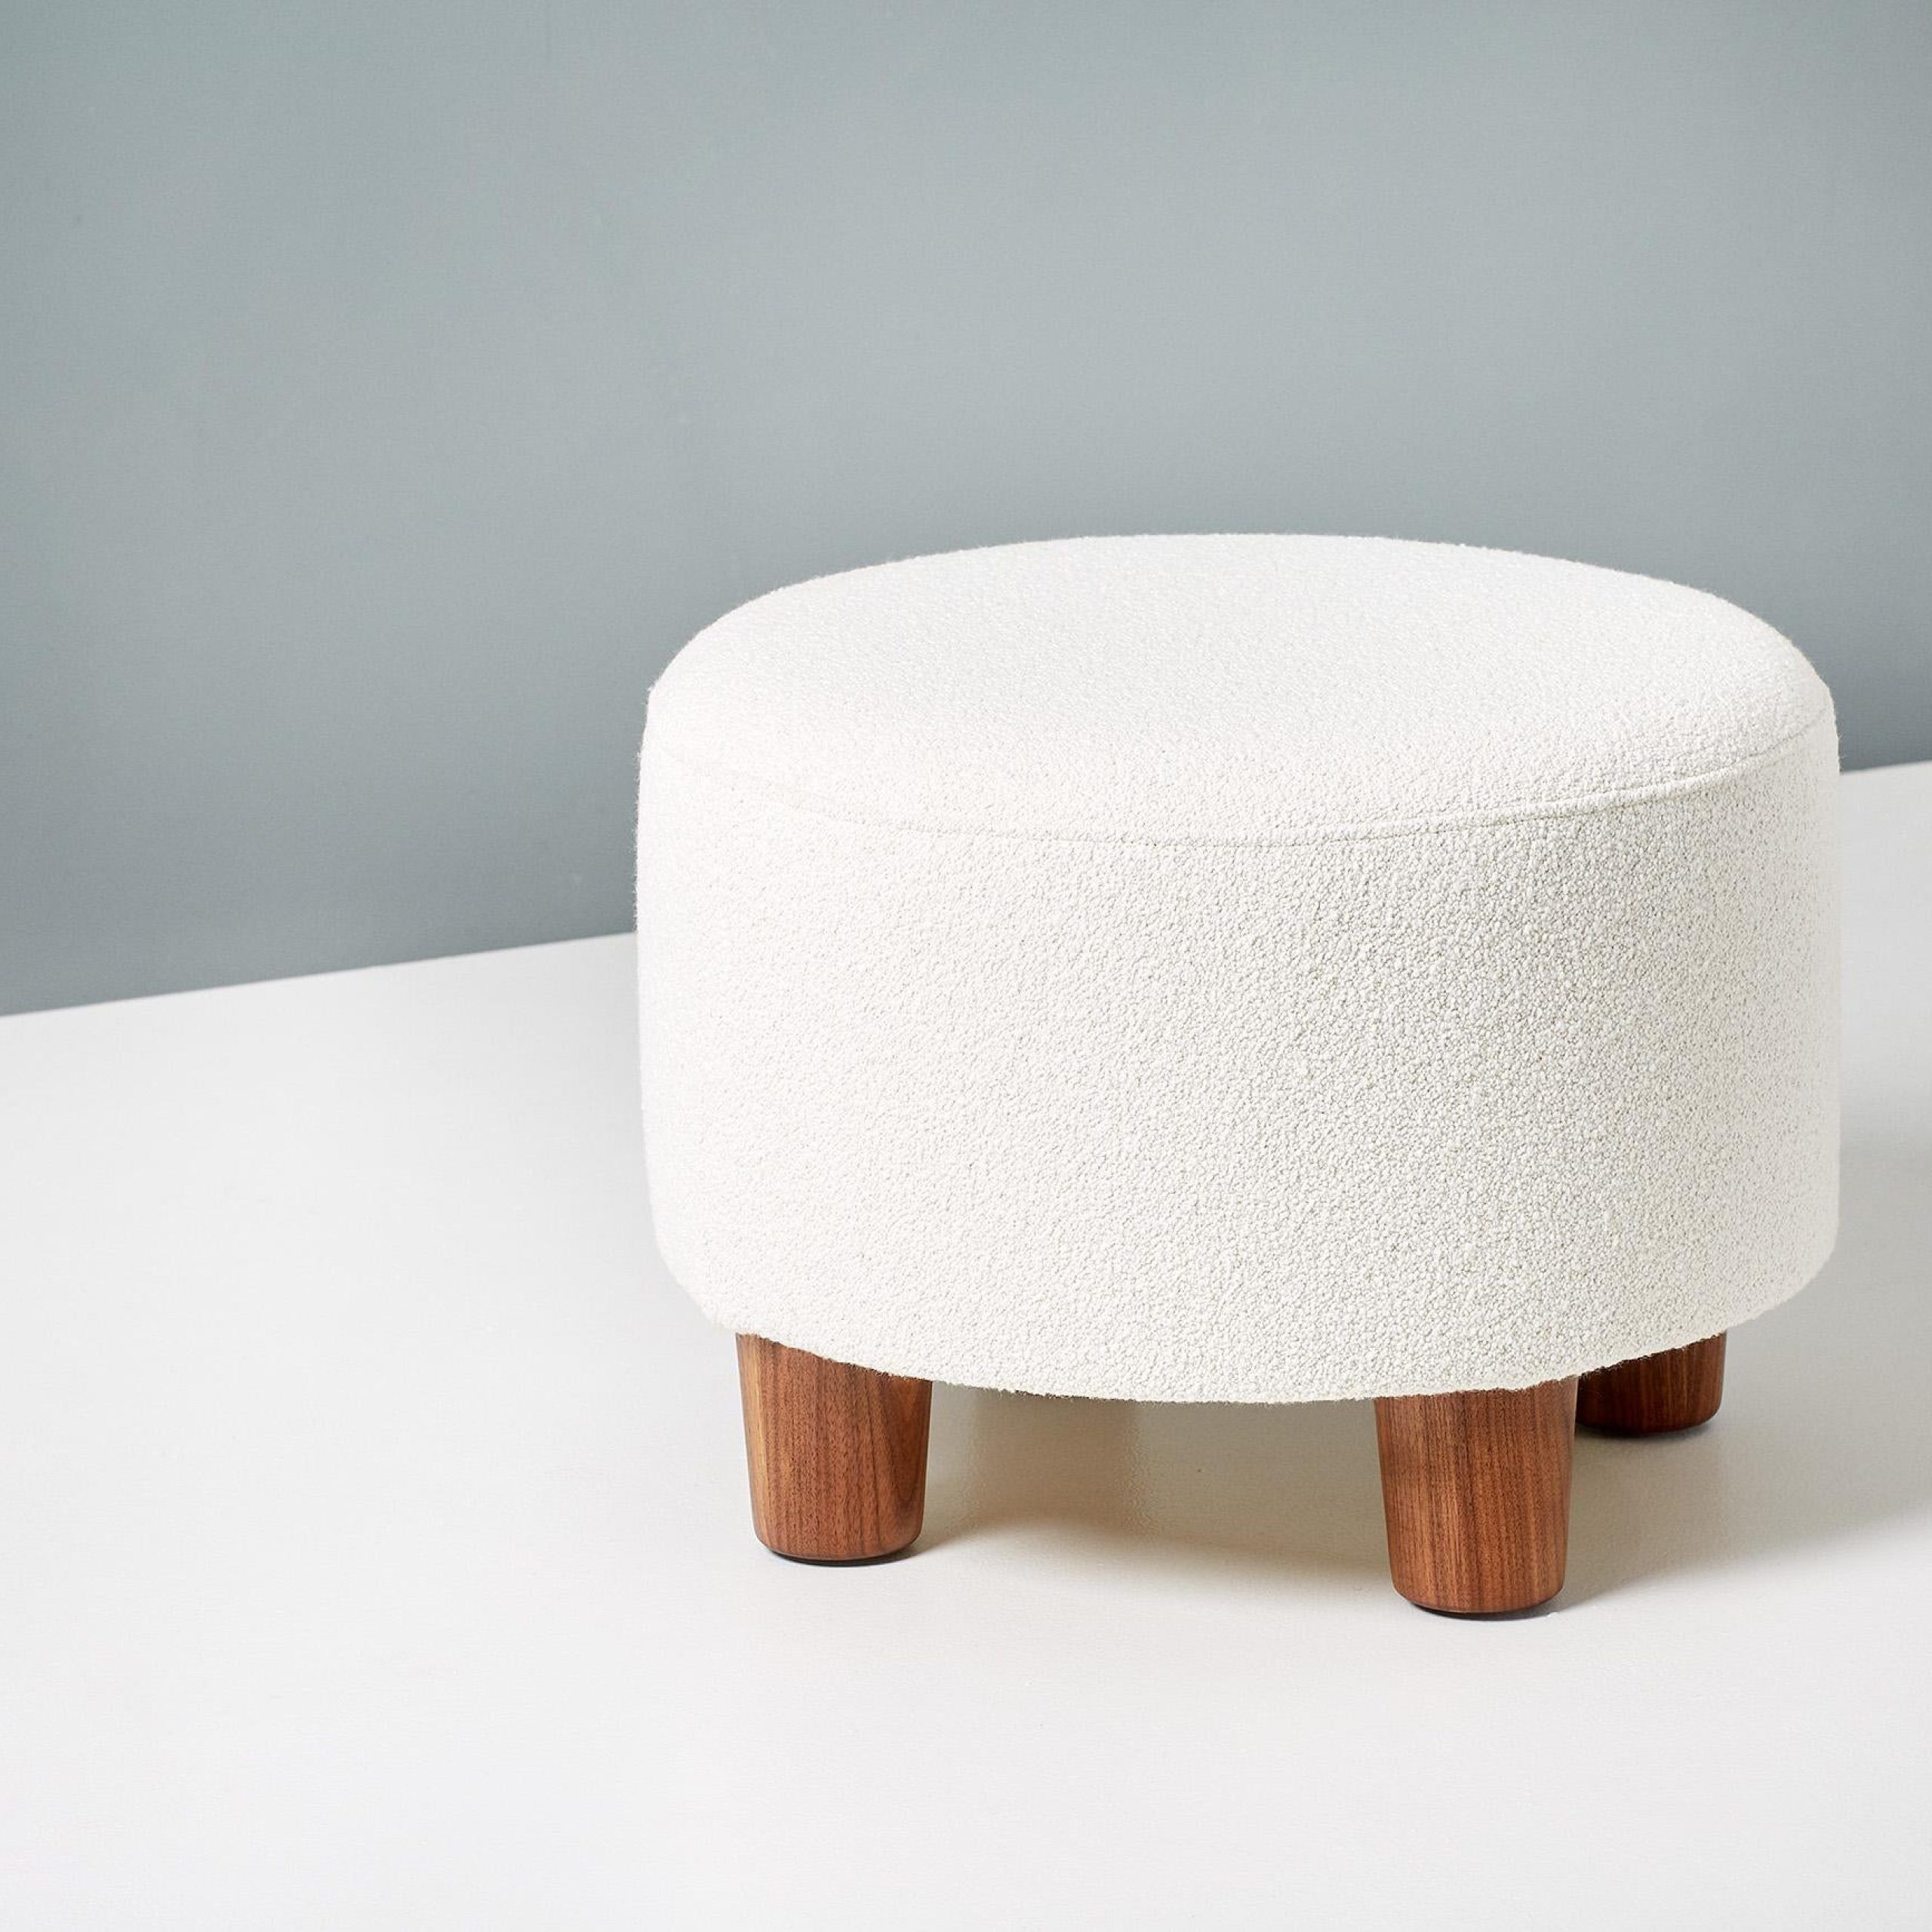 Custom Made Round Boucle Ottoman With Walnut Legs For Sale At 1stdibs With Walnut Round Ottomans (View 15 of 15)